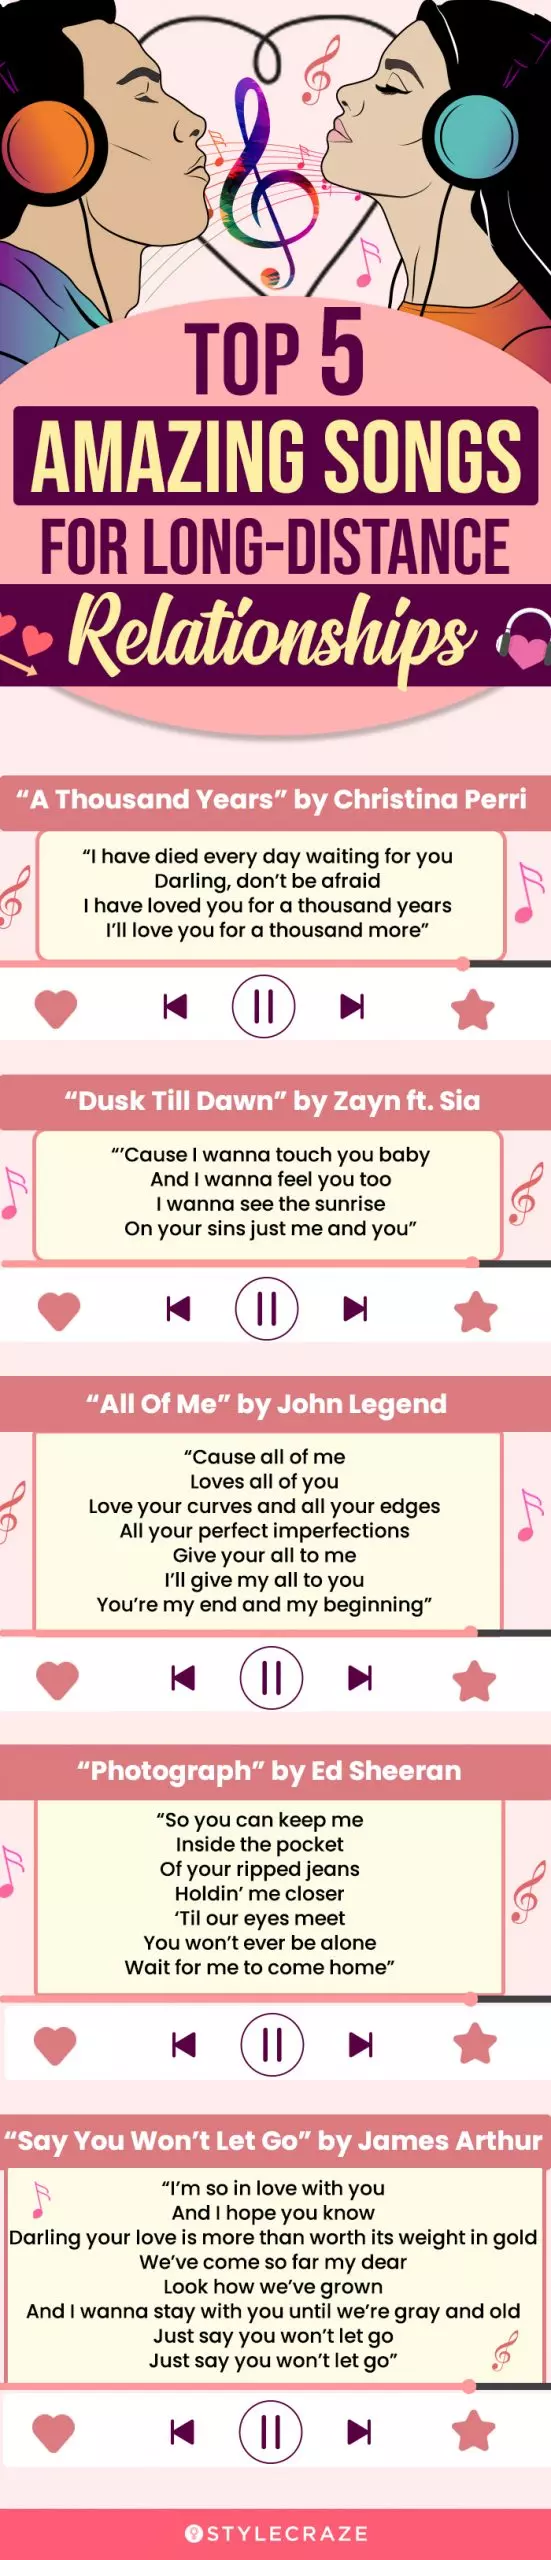 top 5 amazing songs for long distance relationships (infographic)